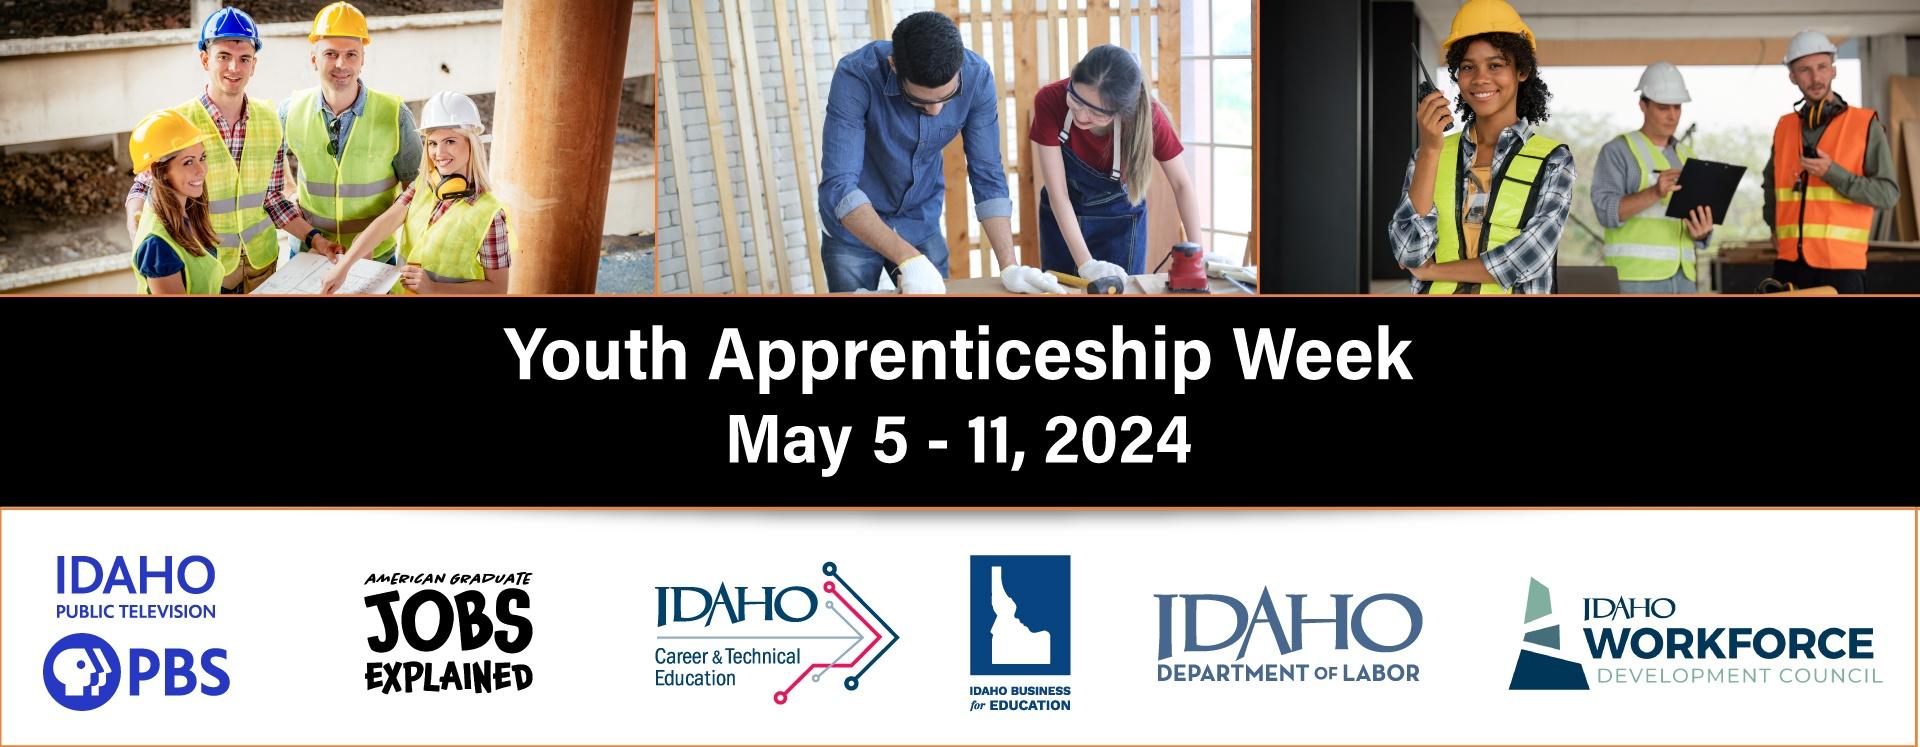 Youth Apprenticeship Week is May 5th through 11th